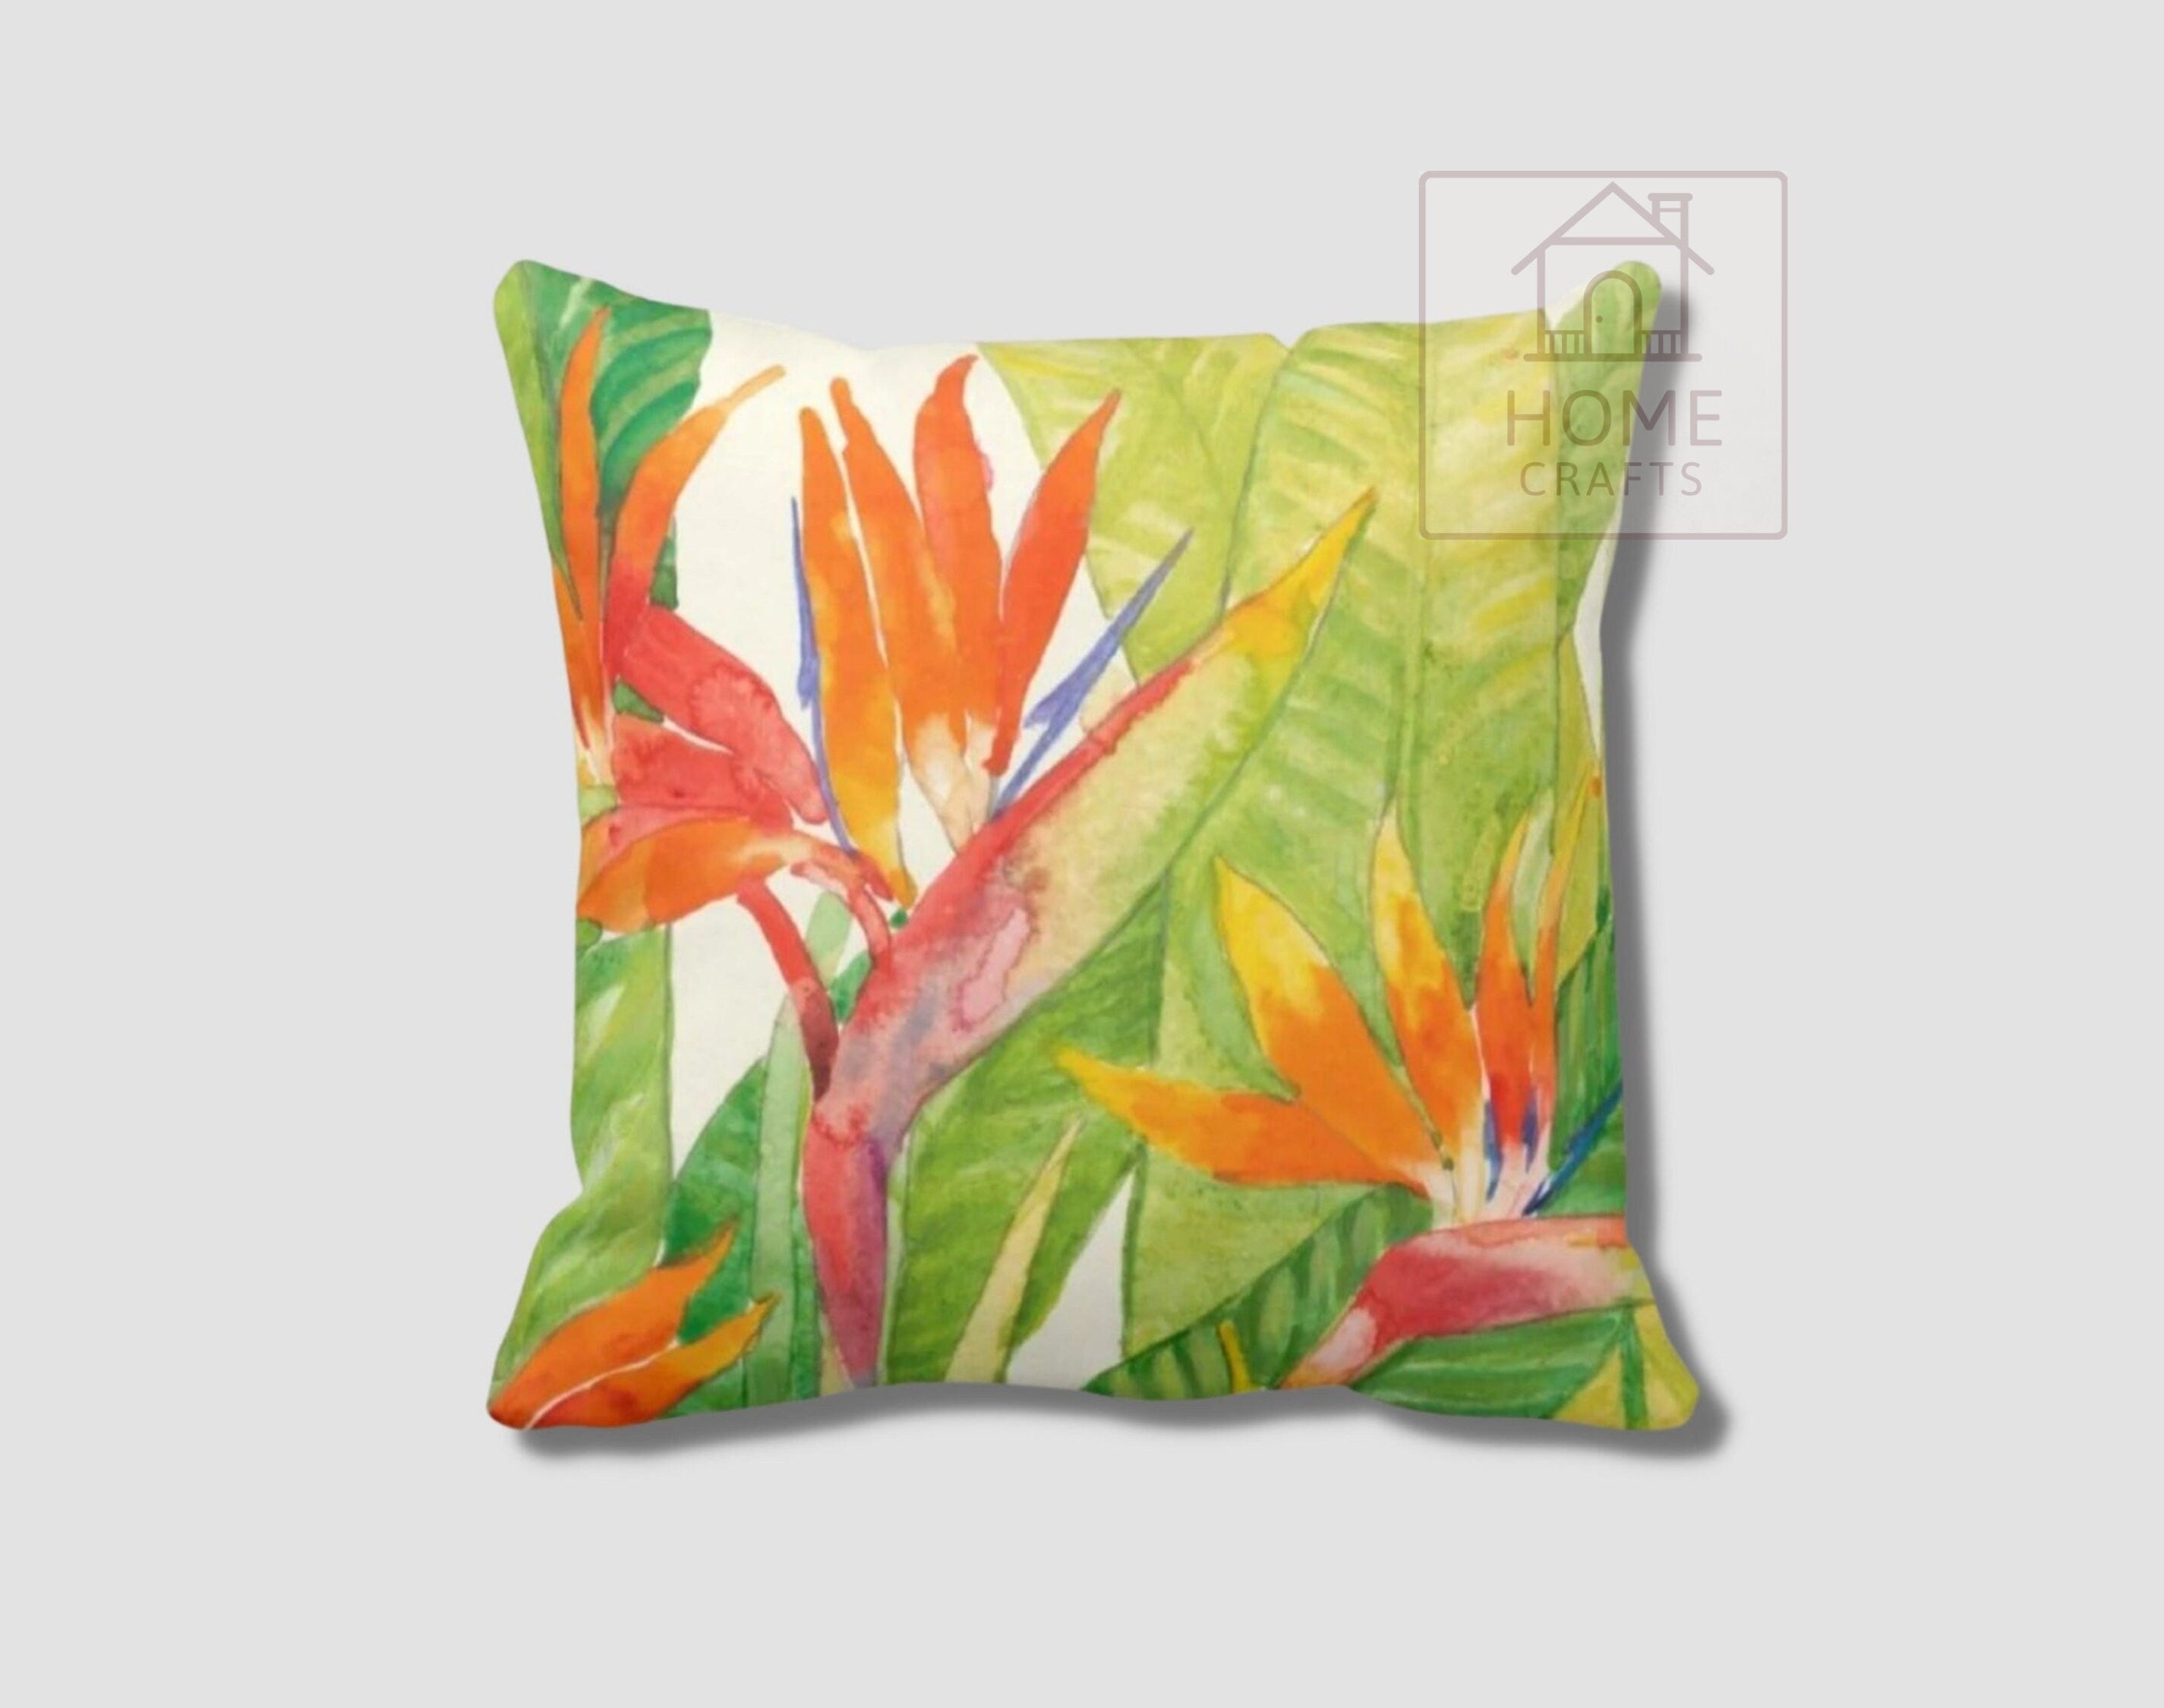 Bird of Paradise Flower Pillow Covers Decorative Trend Cushion Case